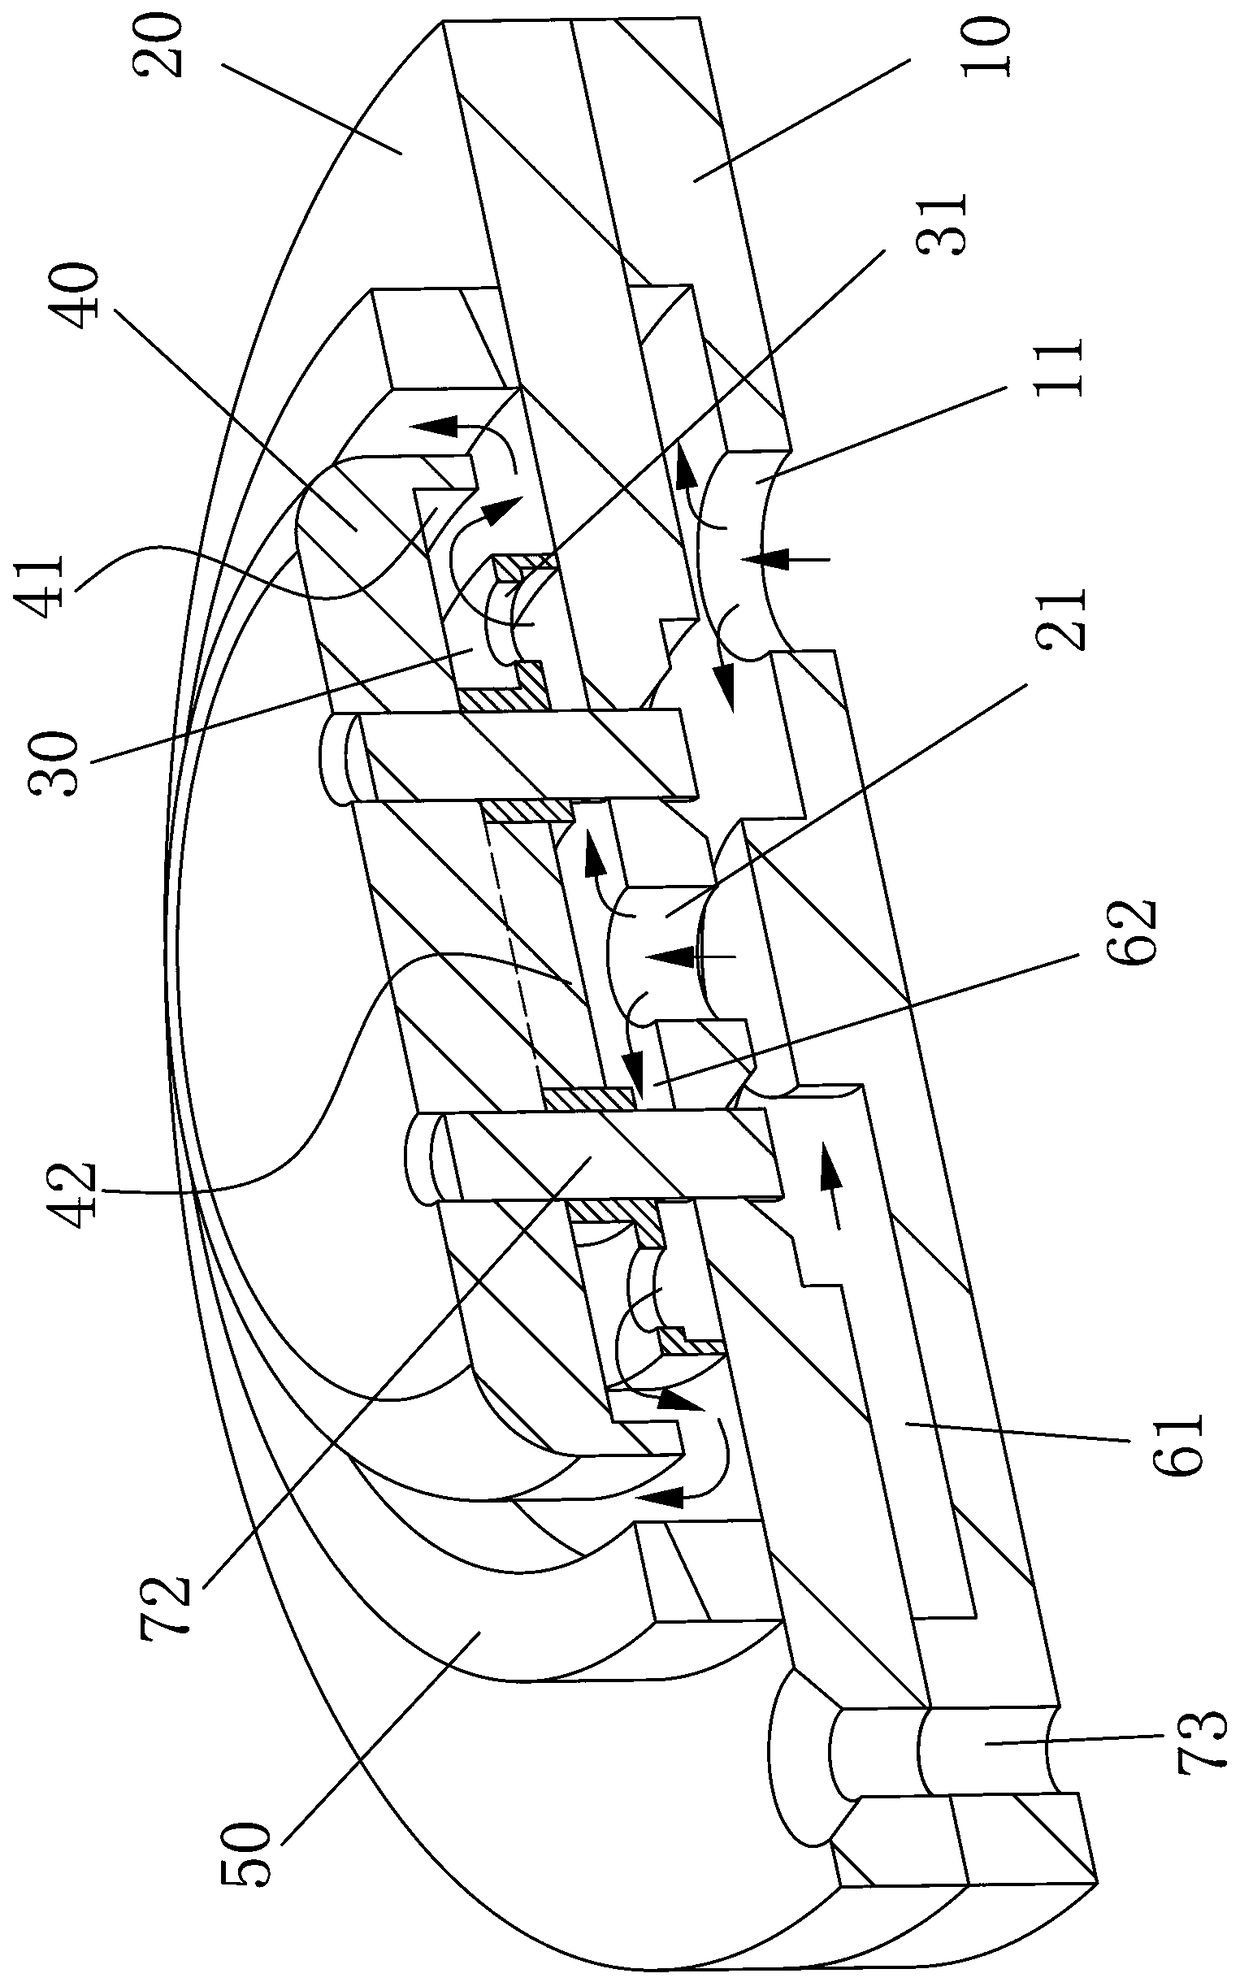 Magnetic-conductive guiding structure of Hall ion source